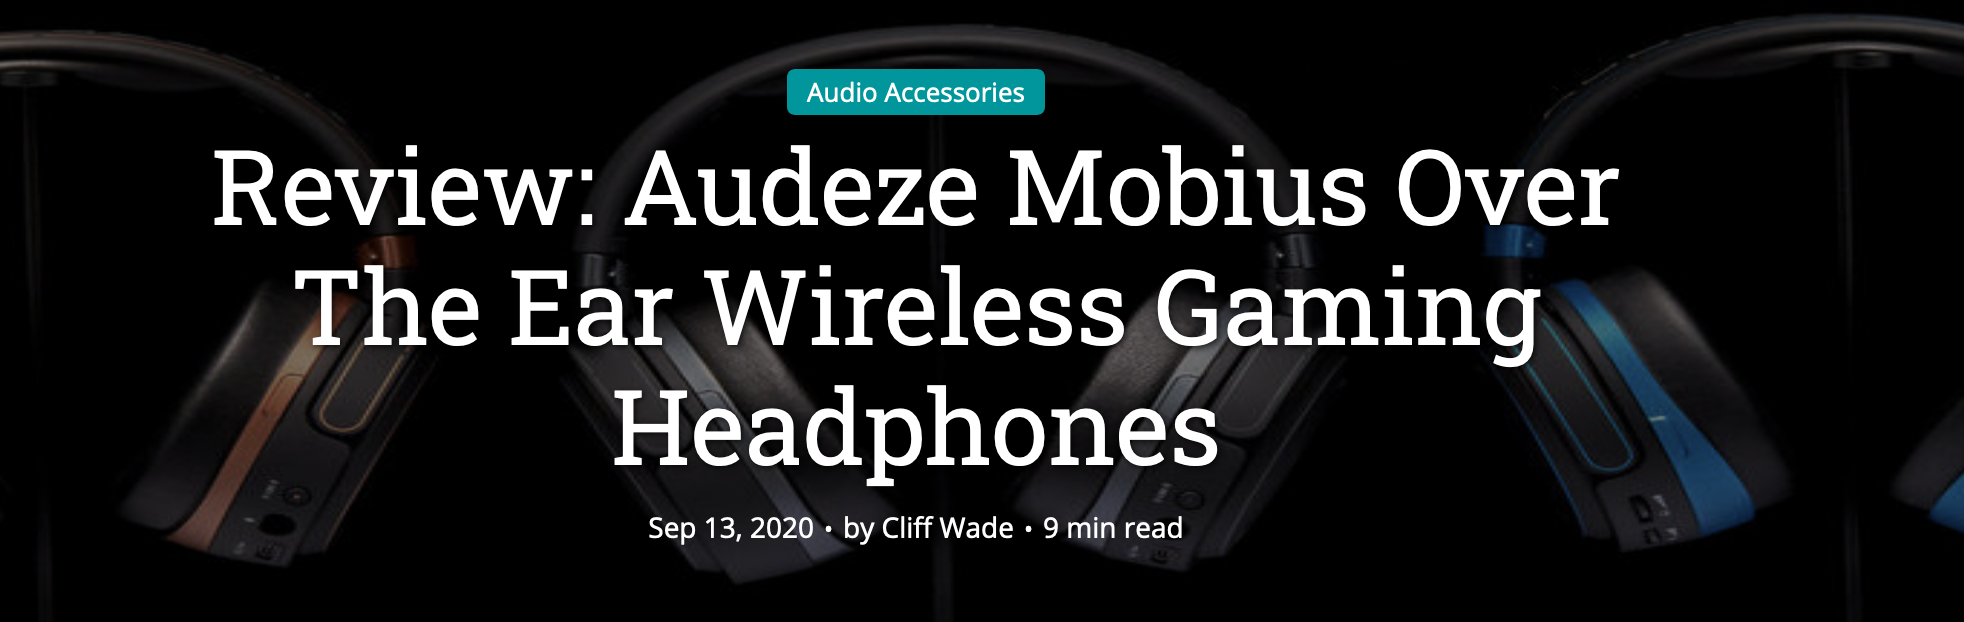 TechDissected Reviews the Audeze Mobius